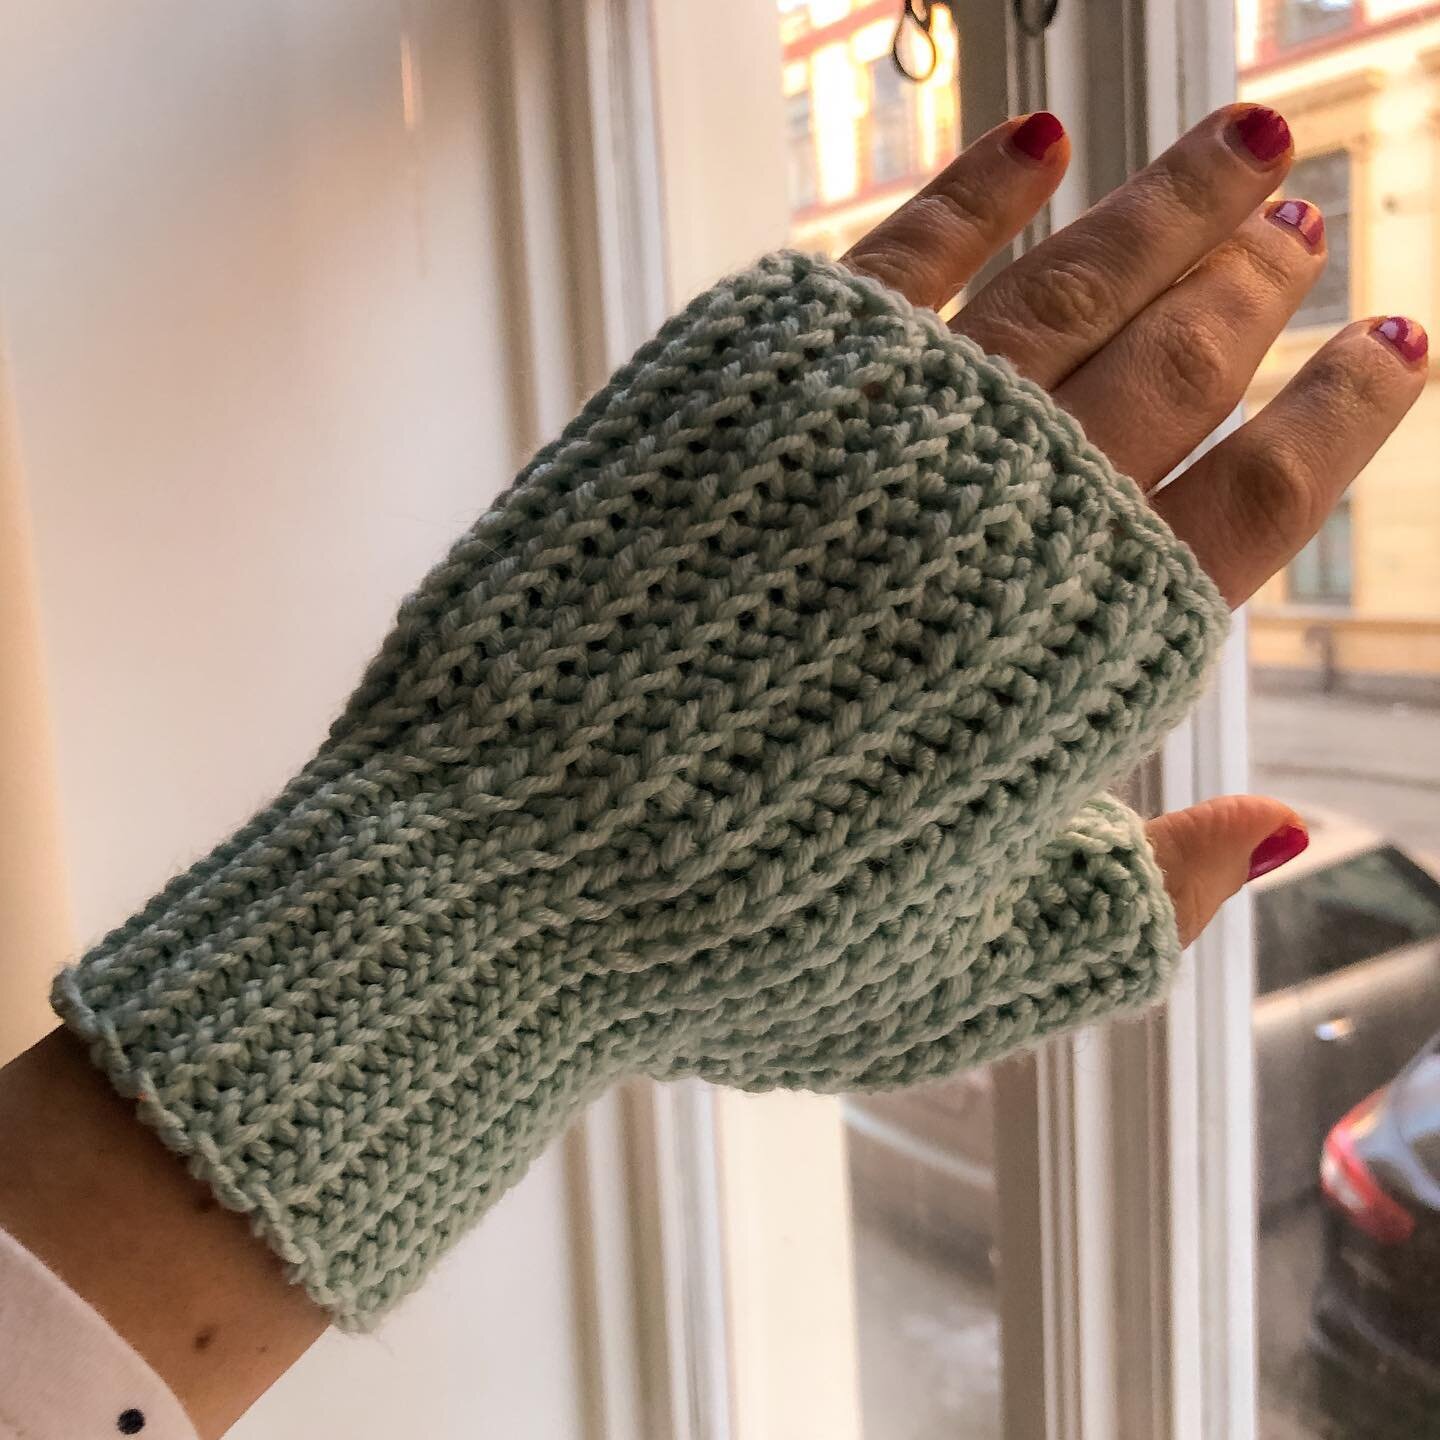 it&rsquo;s a hack! 💾 I used the #noknitmittens pattern to create these fingerless gloves. I love how my mittens turned out, but these are more practical for life in the city 🏙️ 

I omitted the shaping for thumb and fingers, and also lengthened the 